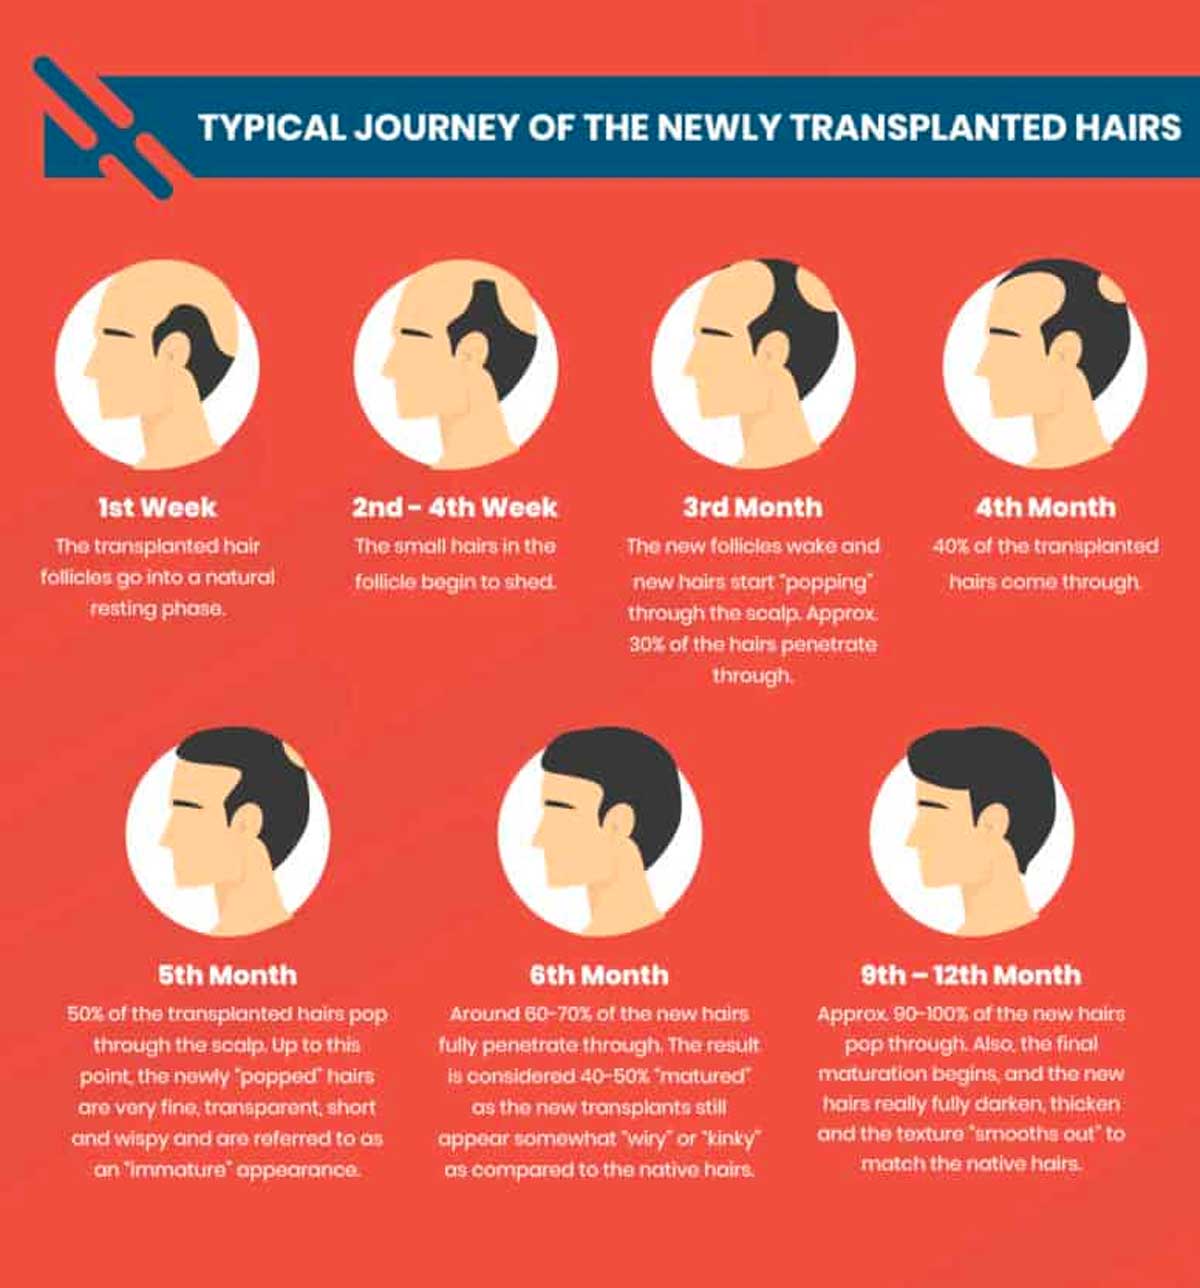 What Should I Do After Hair Transplant?